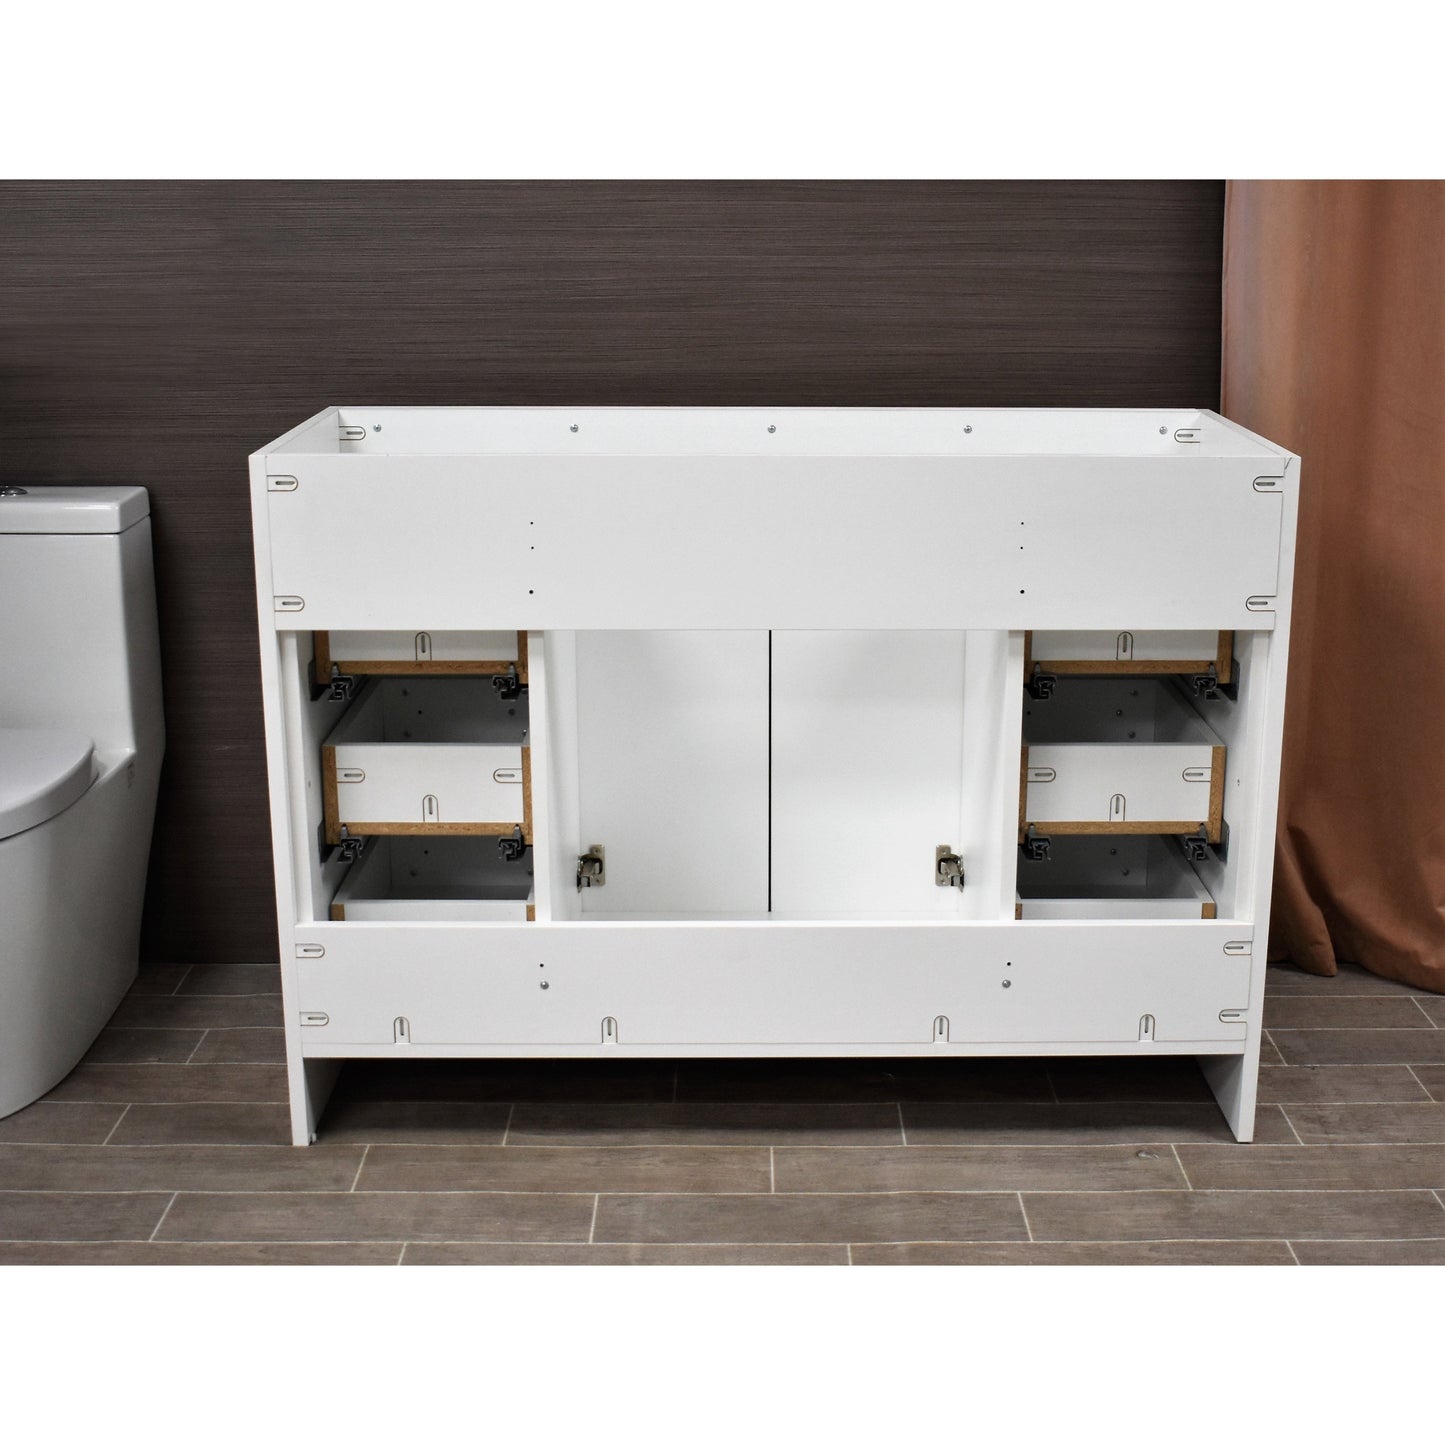 Volpa USA Rio 60" White Freestanding Modern Bathroom Vanity With Integrated Acrylic Single Sink Top and Brushed Nickel Handles